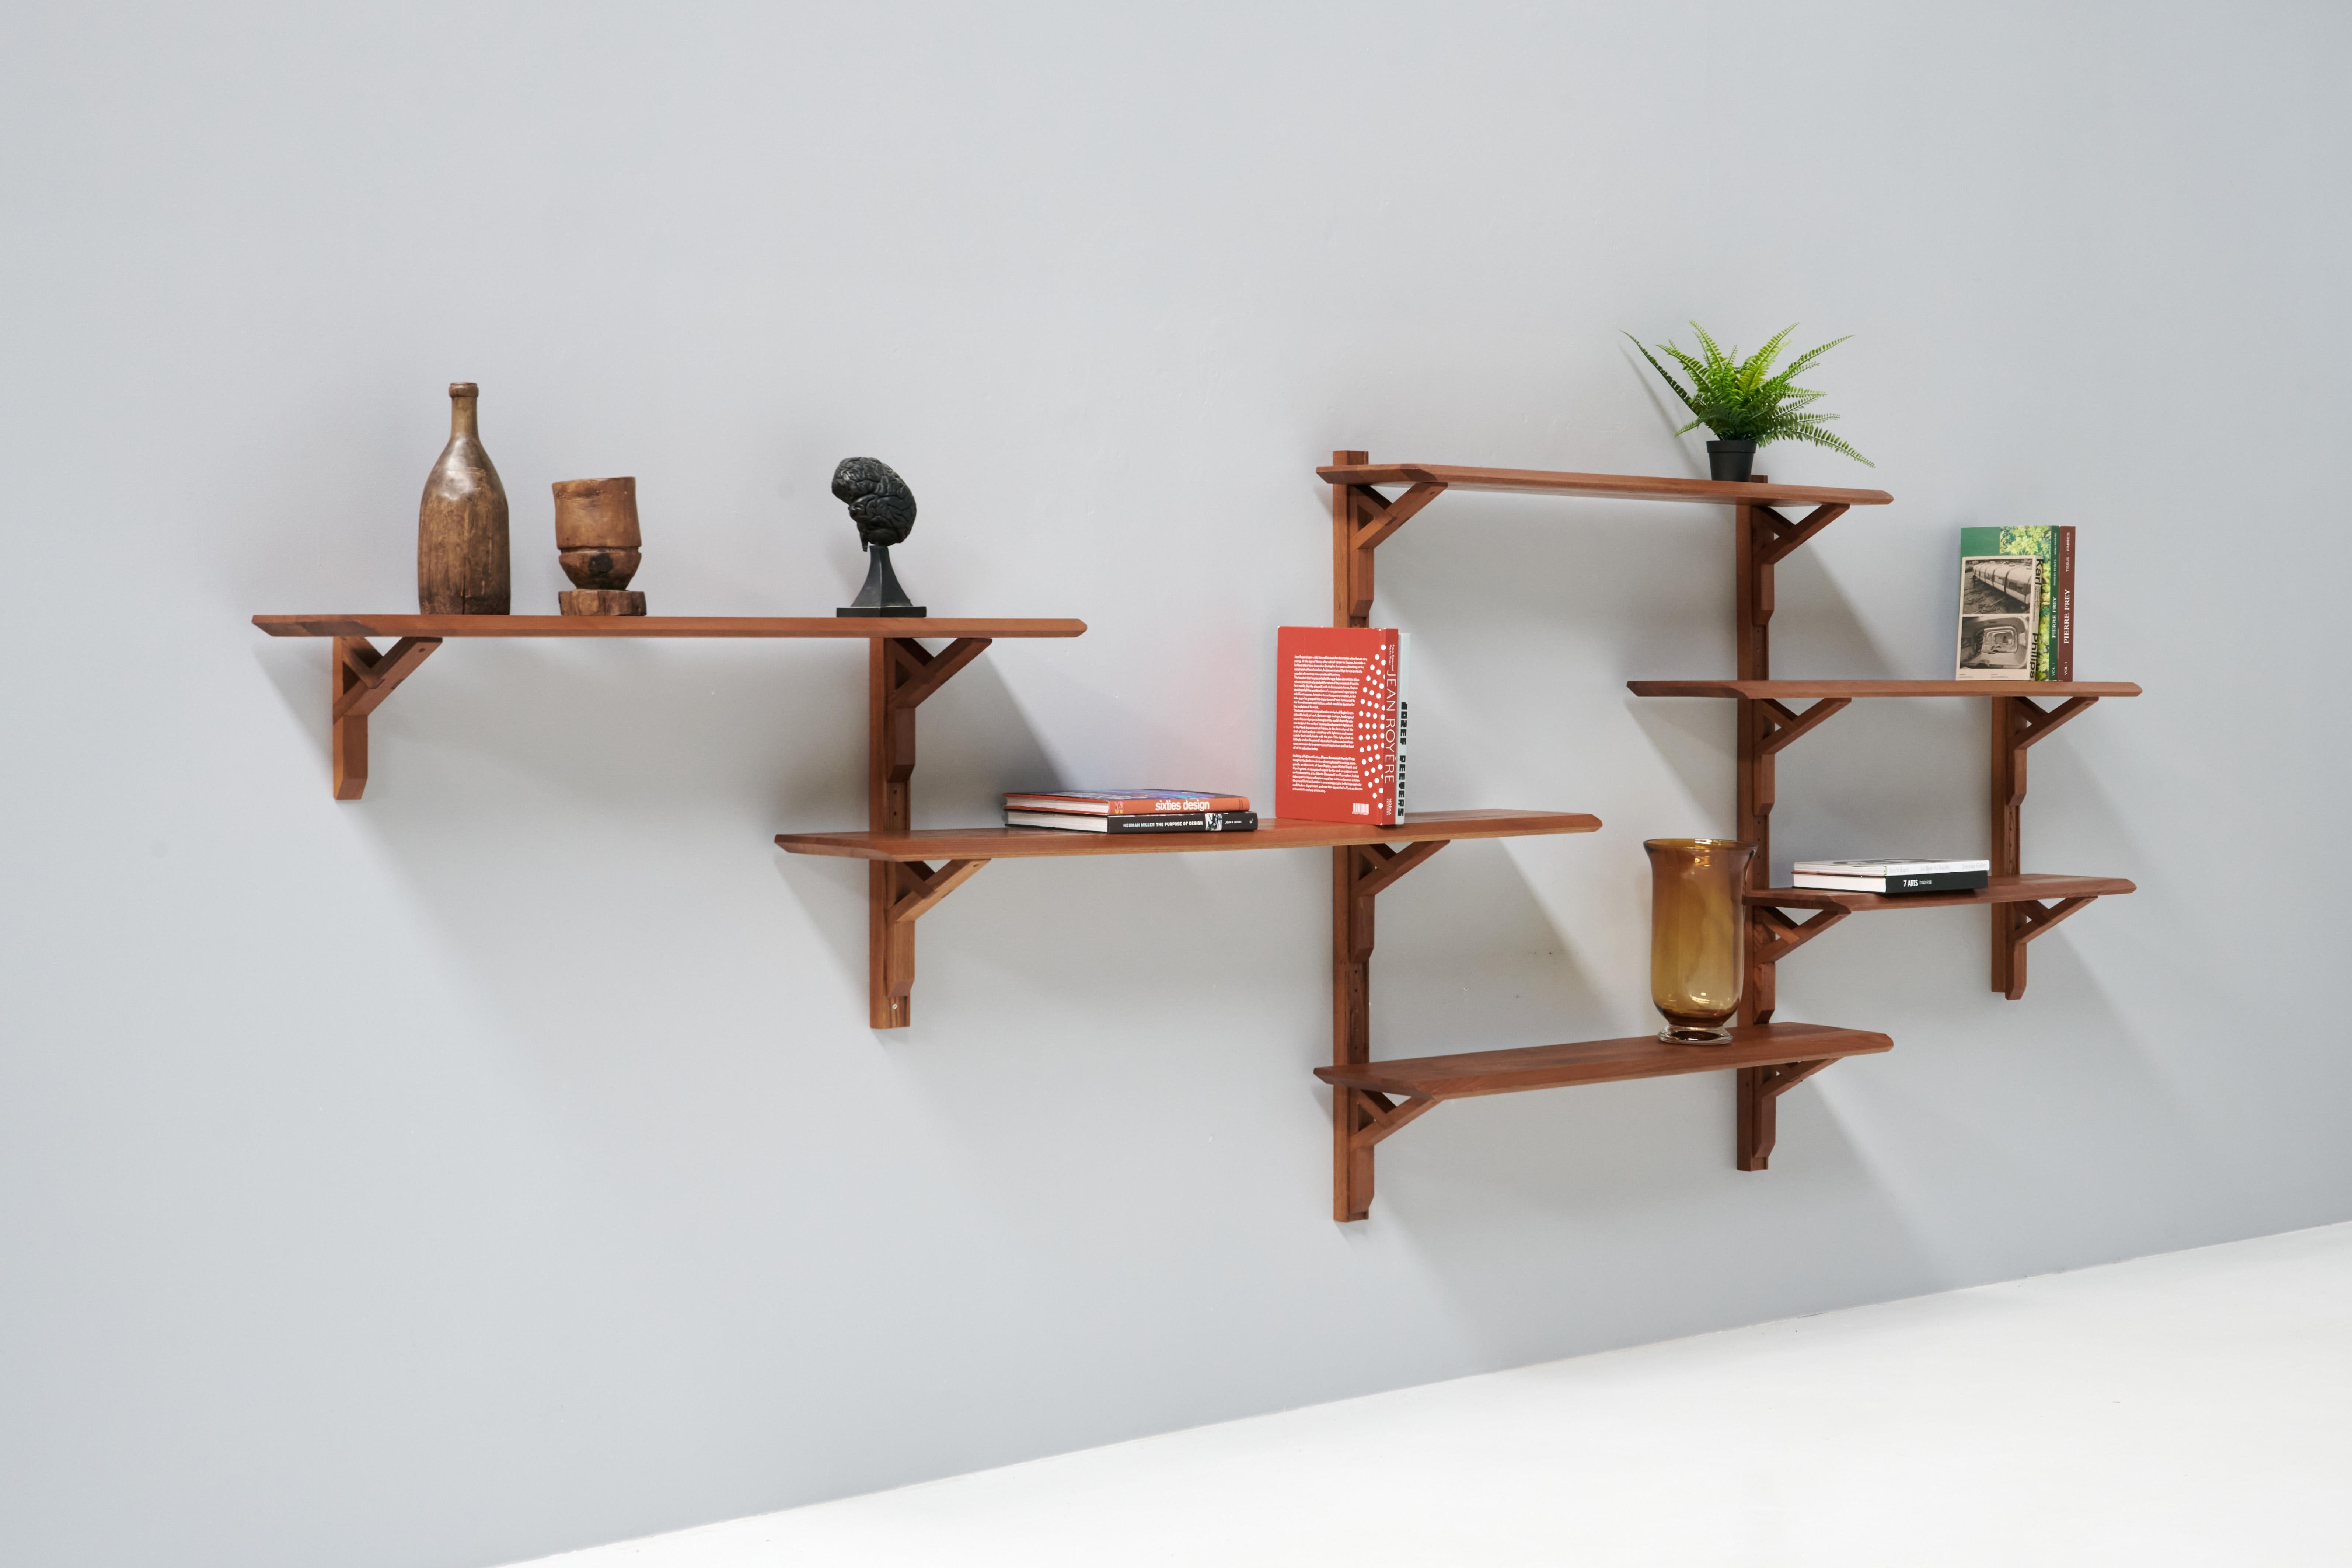 Bookshelf B30 by Pierre Chapo, a masterpiece of artisanal craftsmanship handcrafted in the enchanting village of Gordes at the Chapo Atelier. Handmade with precision and passion, this exceptional bookshelf boasts six adjustable shelves of varying